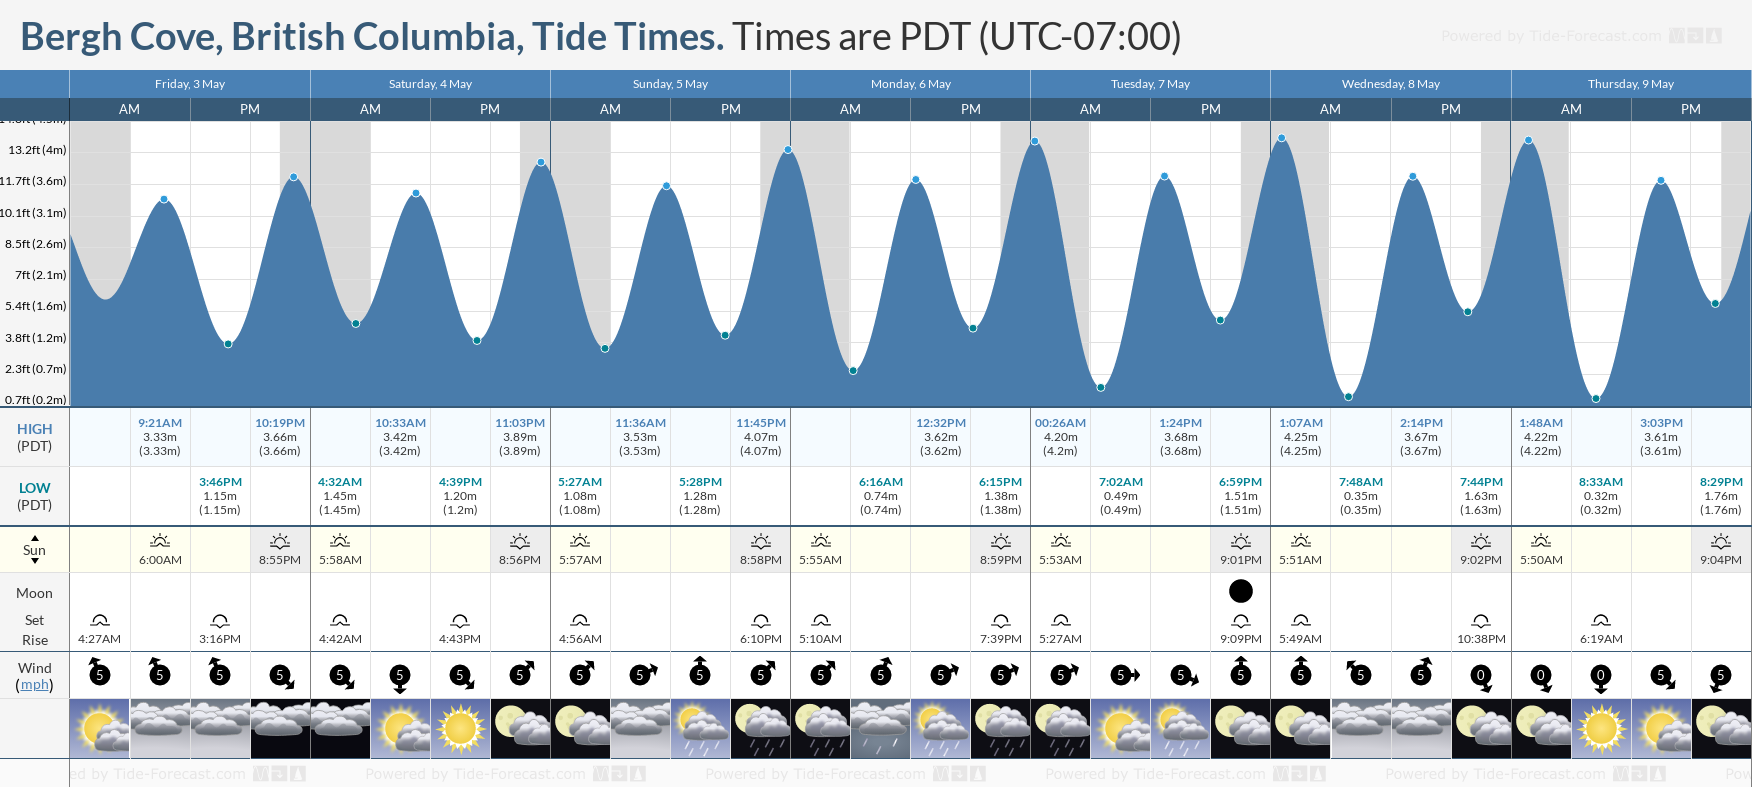 Bergh Cove, British Columbia Tide Chart including high and low tide times for the next 7 days